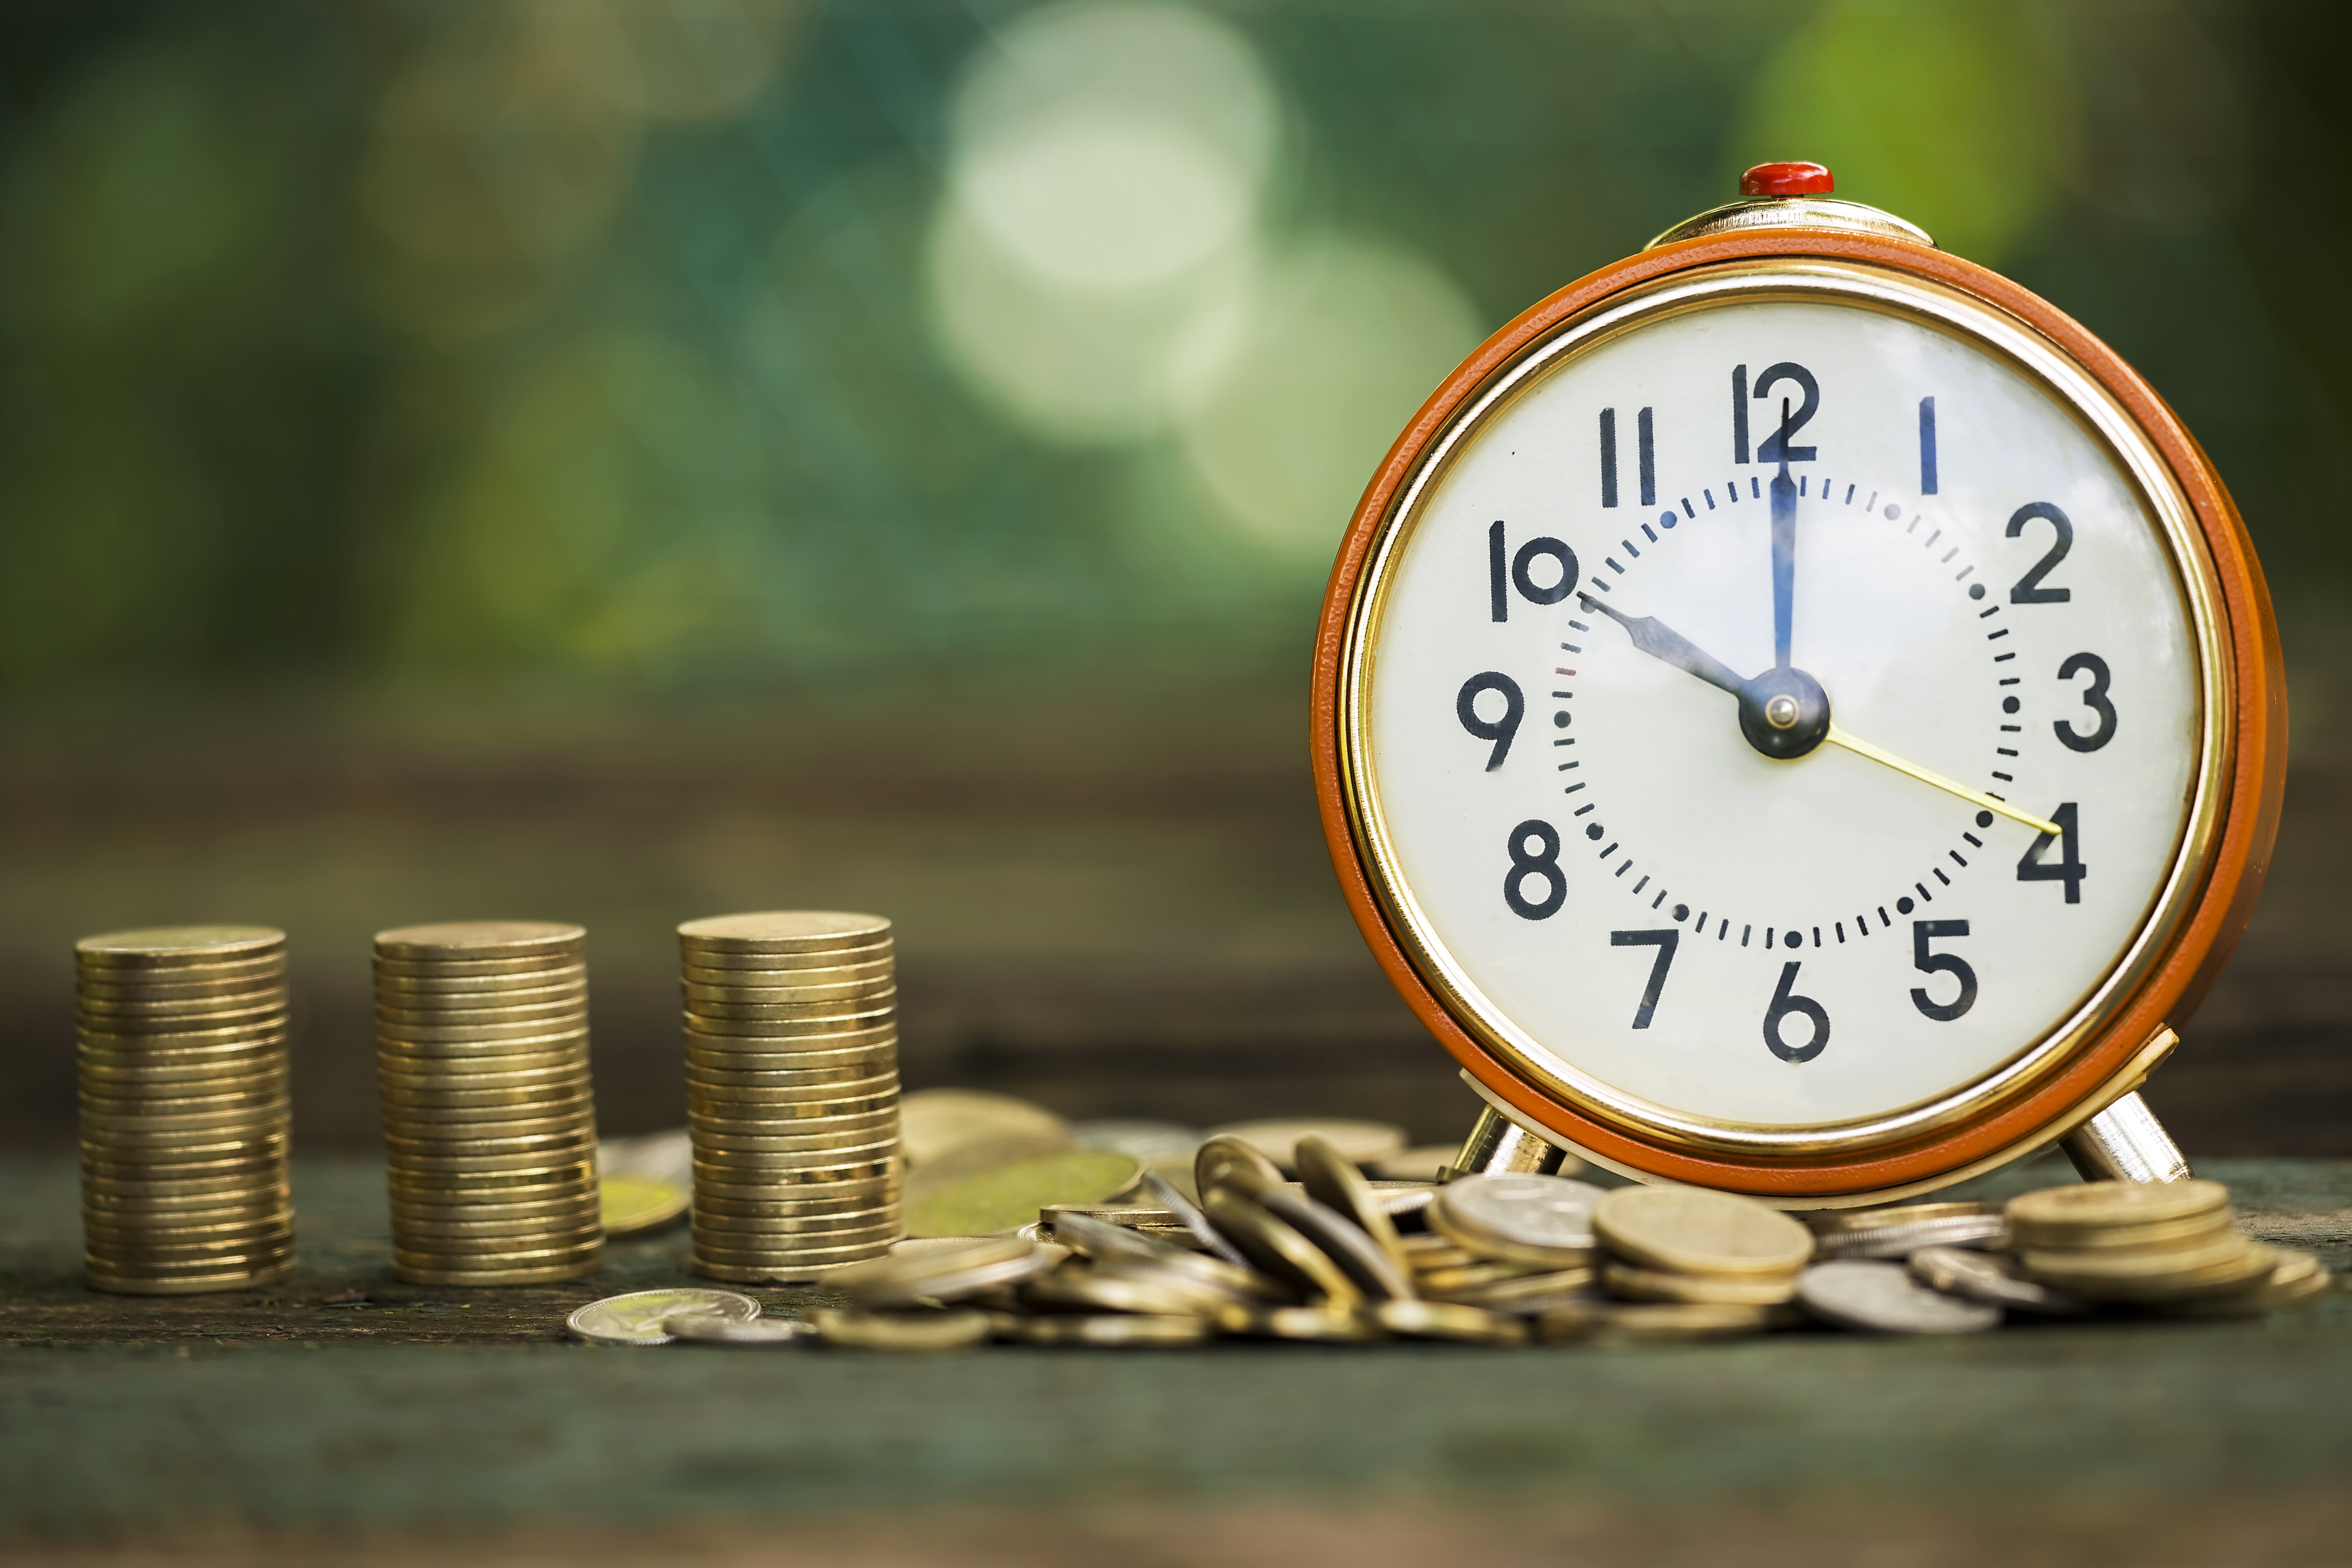 Time Value Of Money - HD Wallpaper 